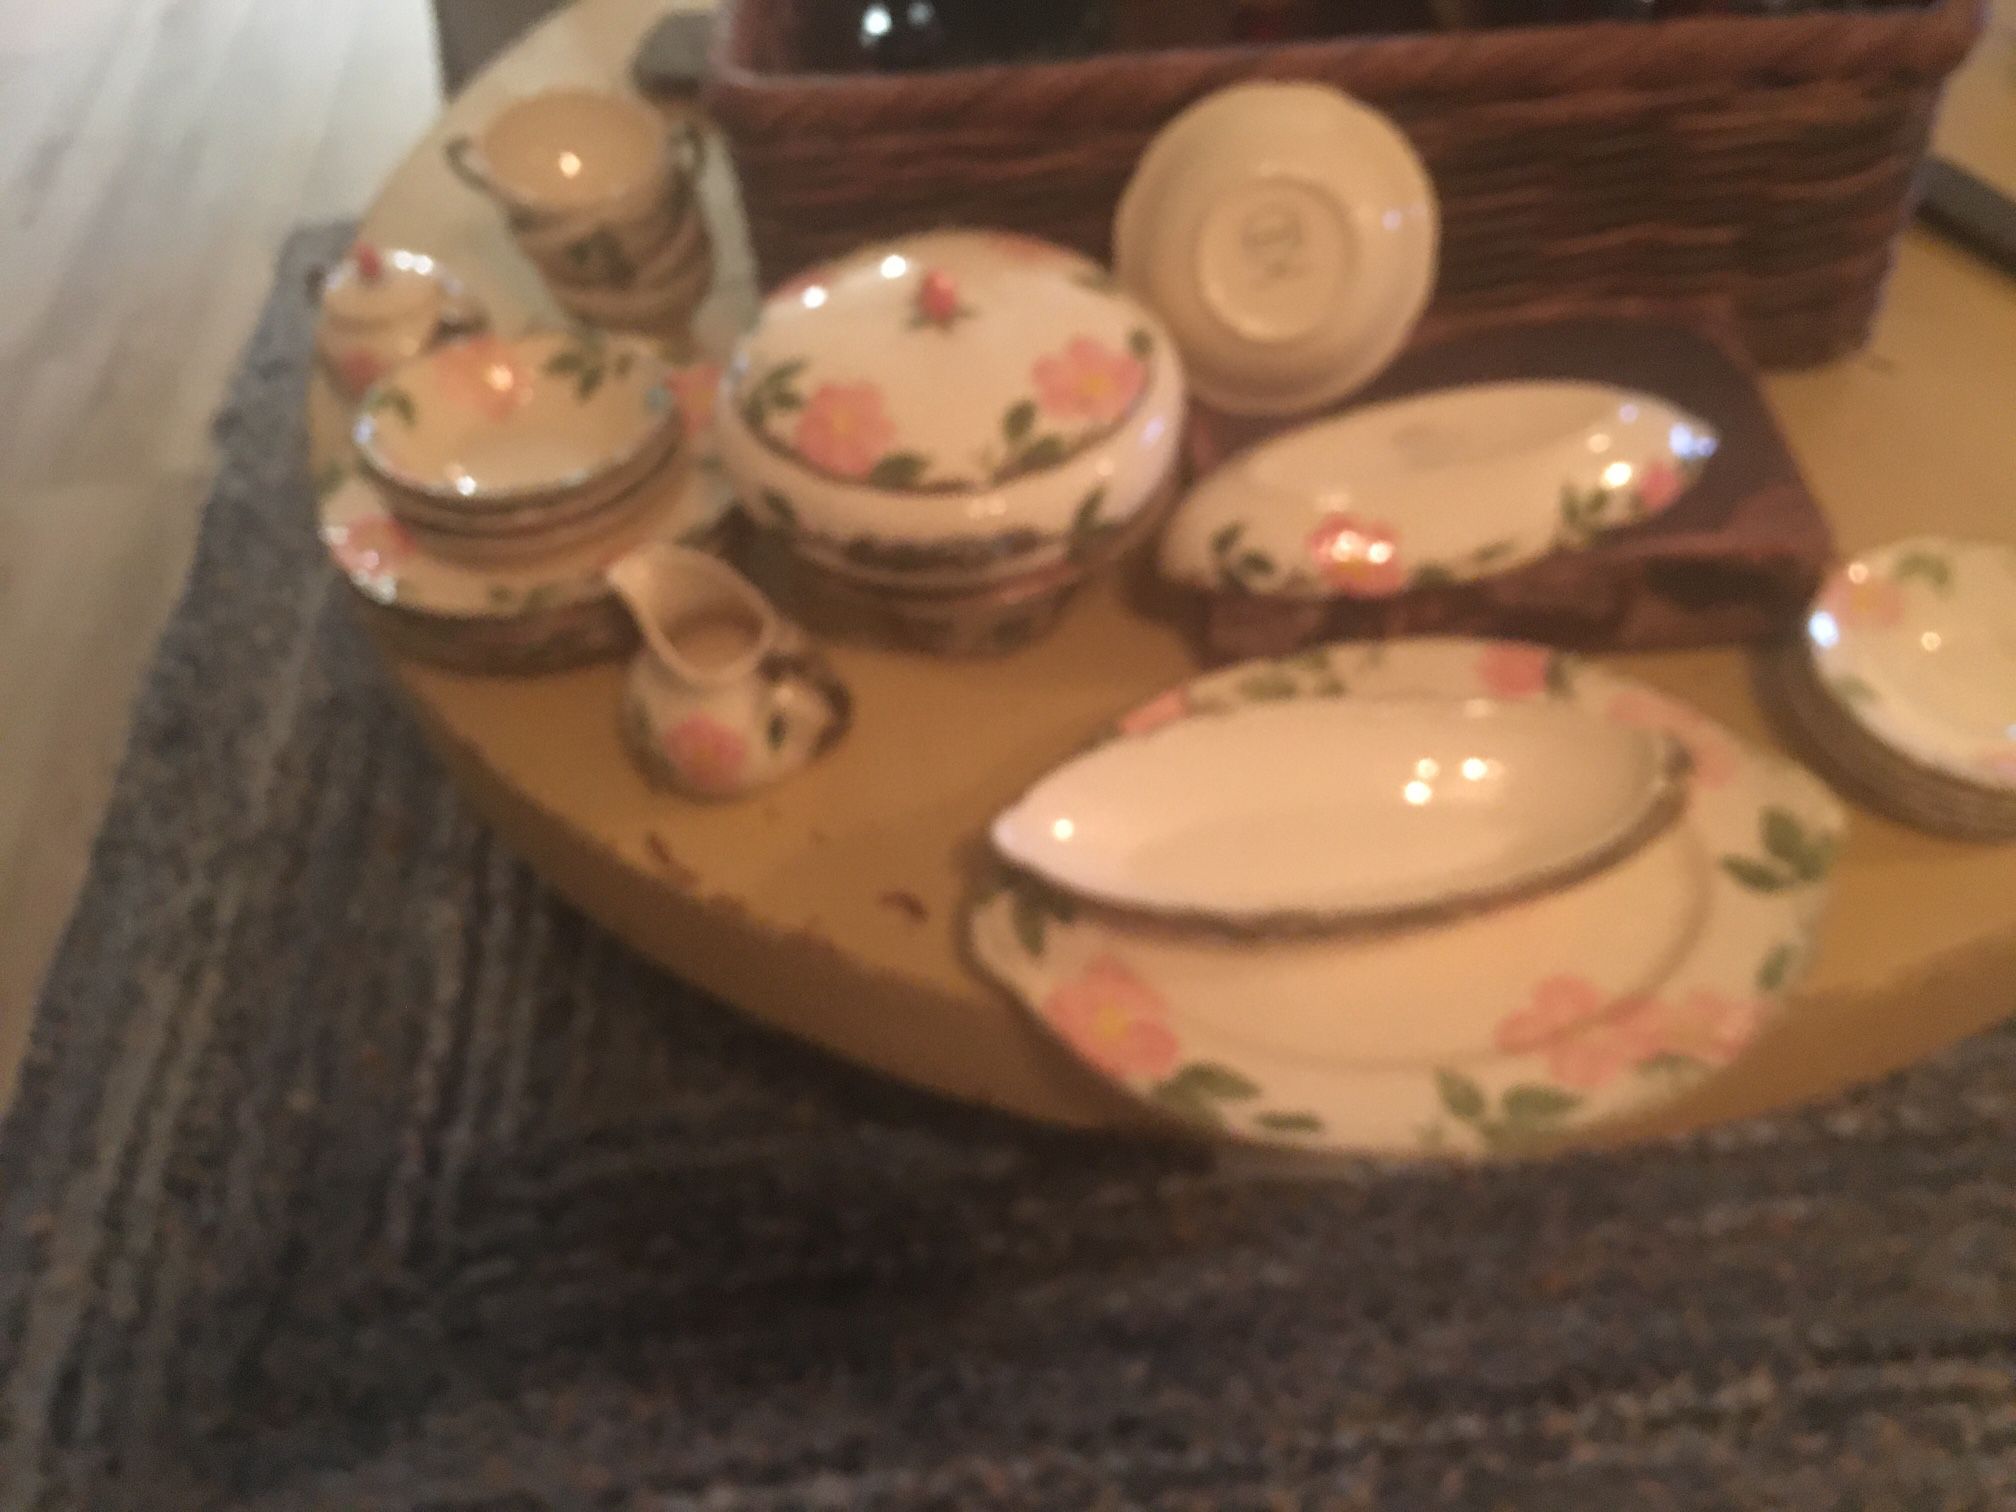 4 Place Setting Of desert rose Dishes.  Including Cake Stand, 3 Gravy Boats, Round Casserole Dish With Lid.